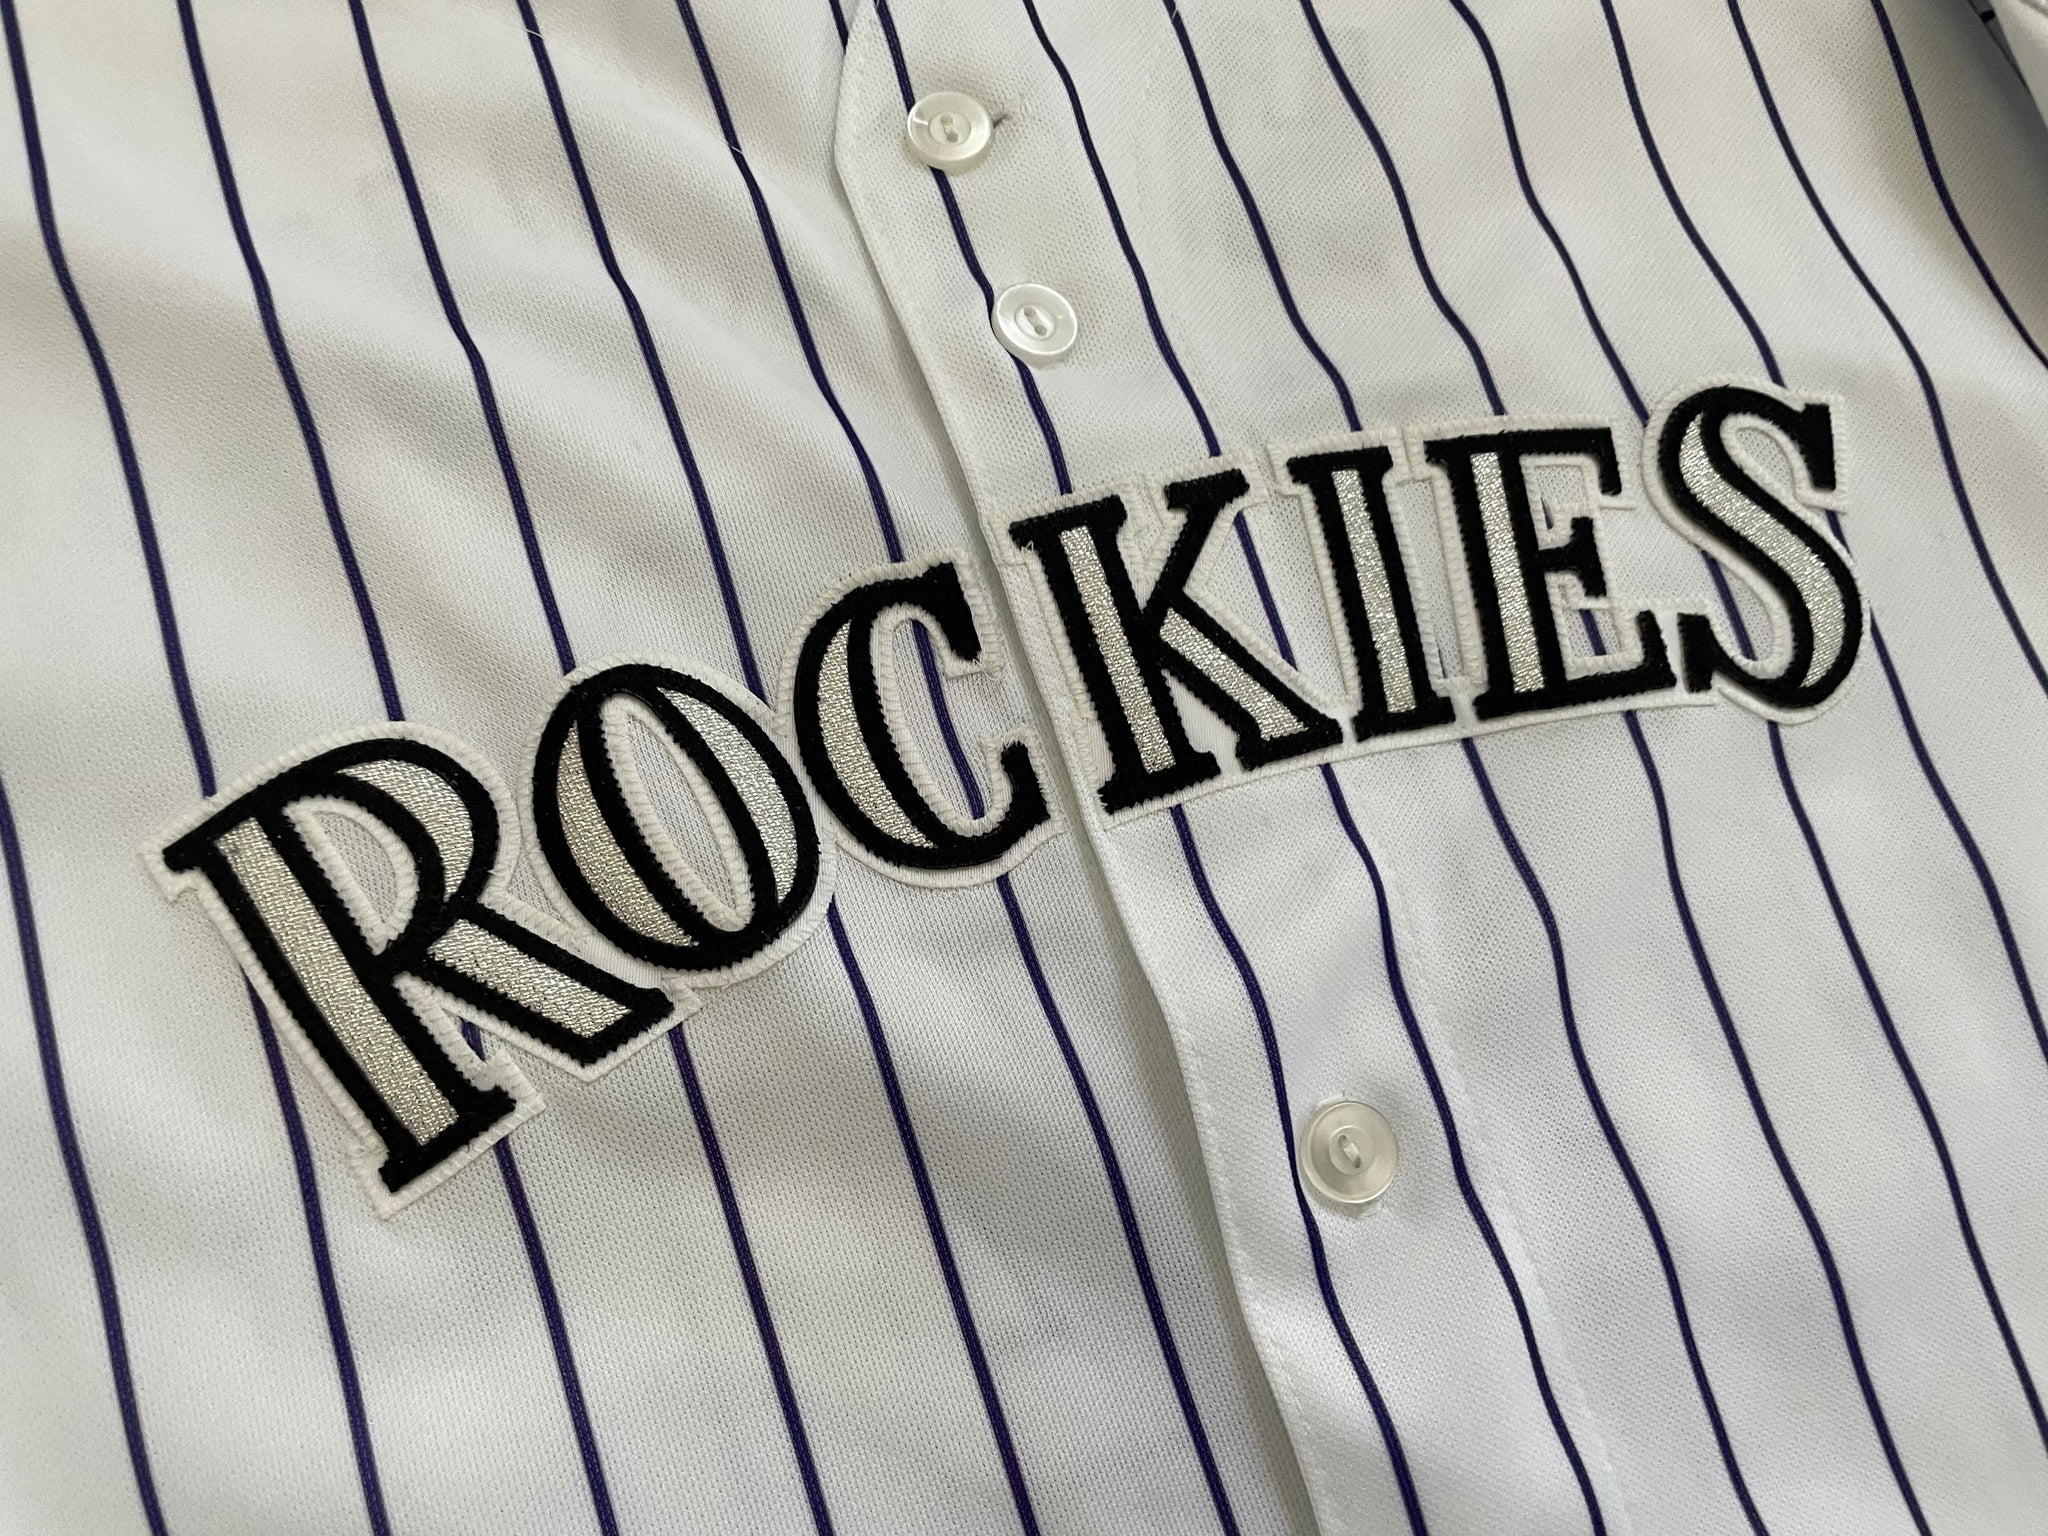 Colorado Rockies Todd Helton Majestic Baseball Jersey, Size Youth Larg –  Stuck In The 90s Sports